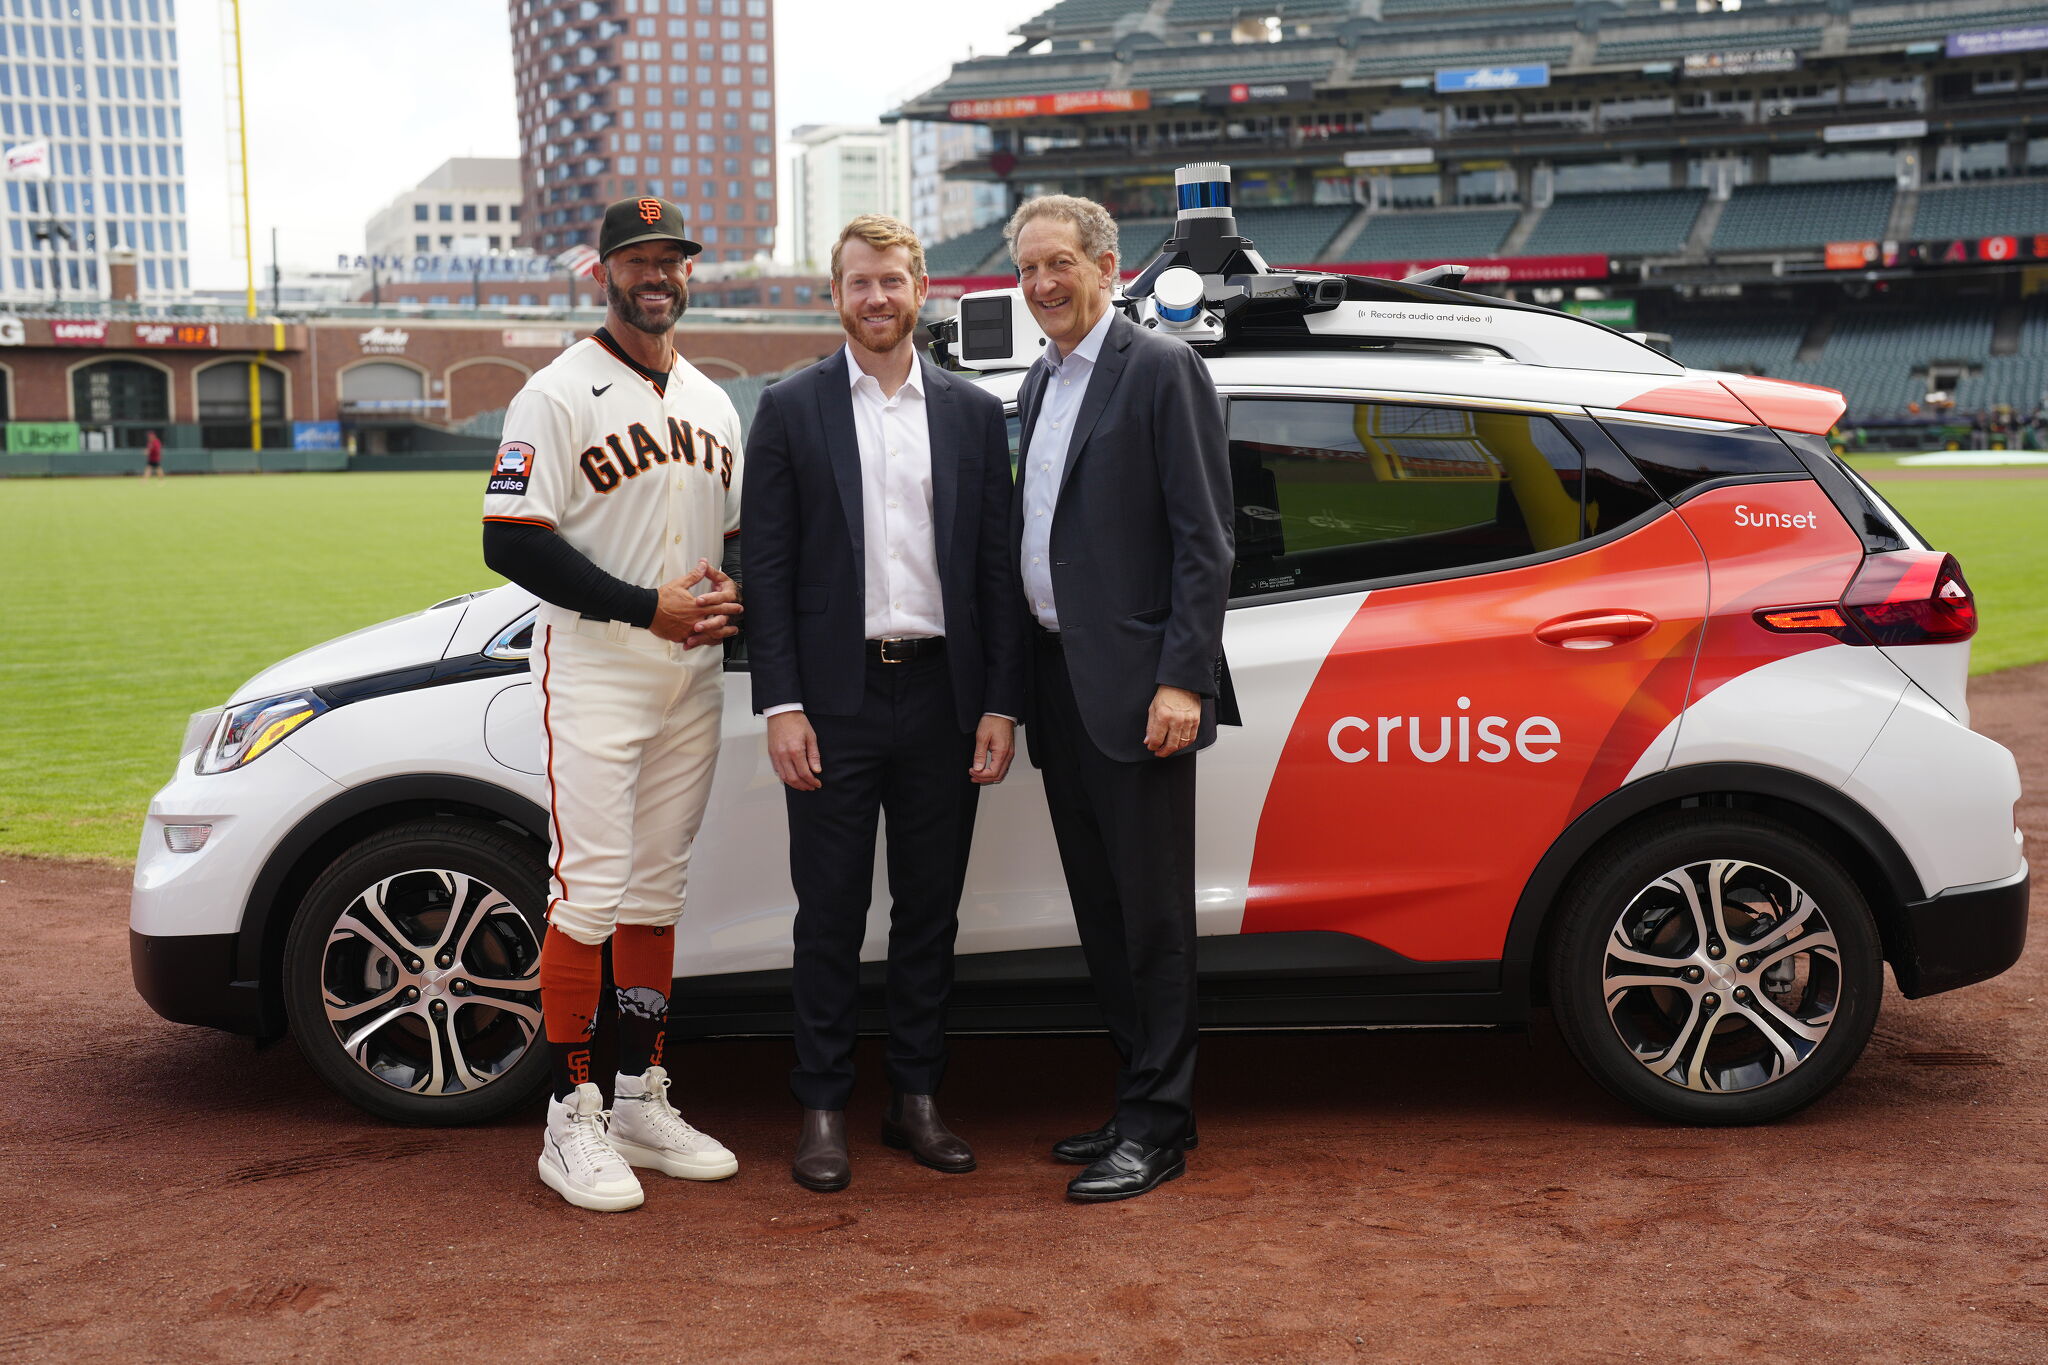 SF Giants announce self-driving car company as jersey patch